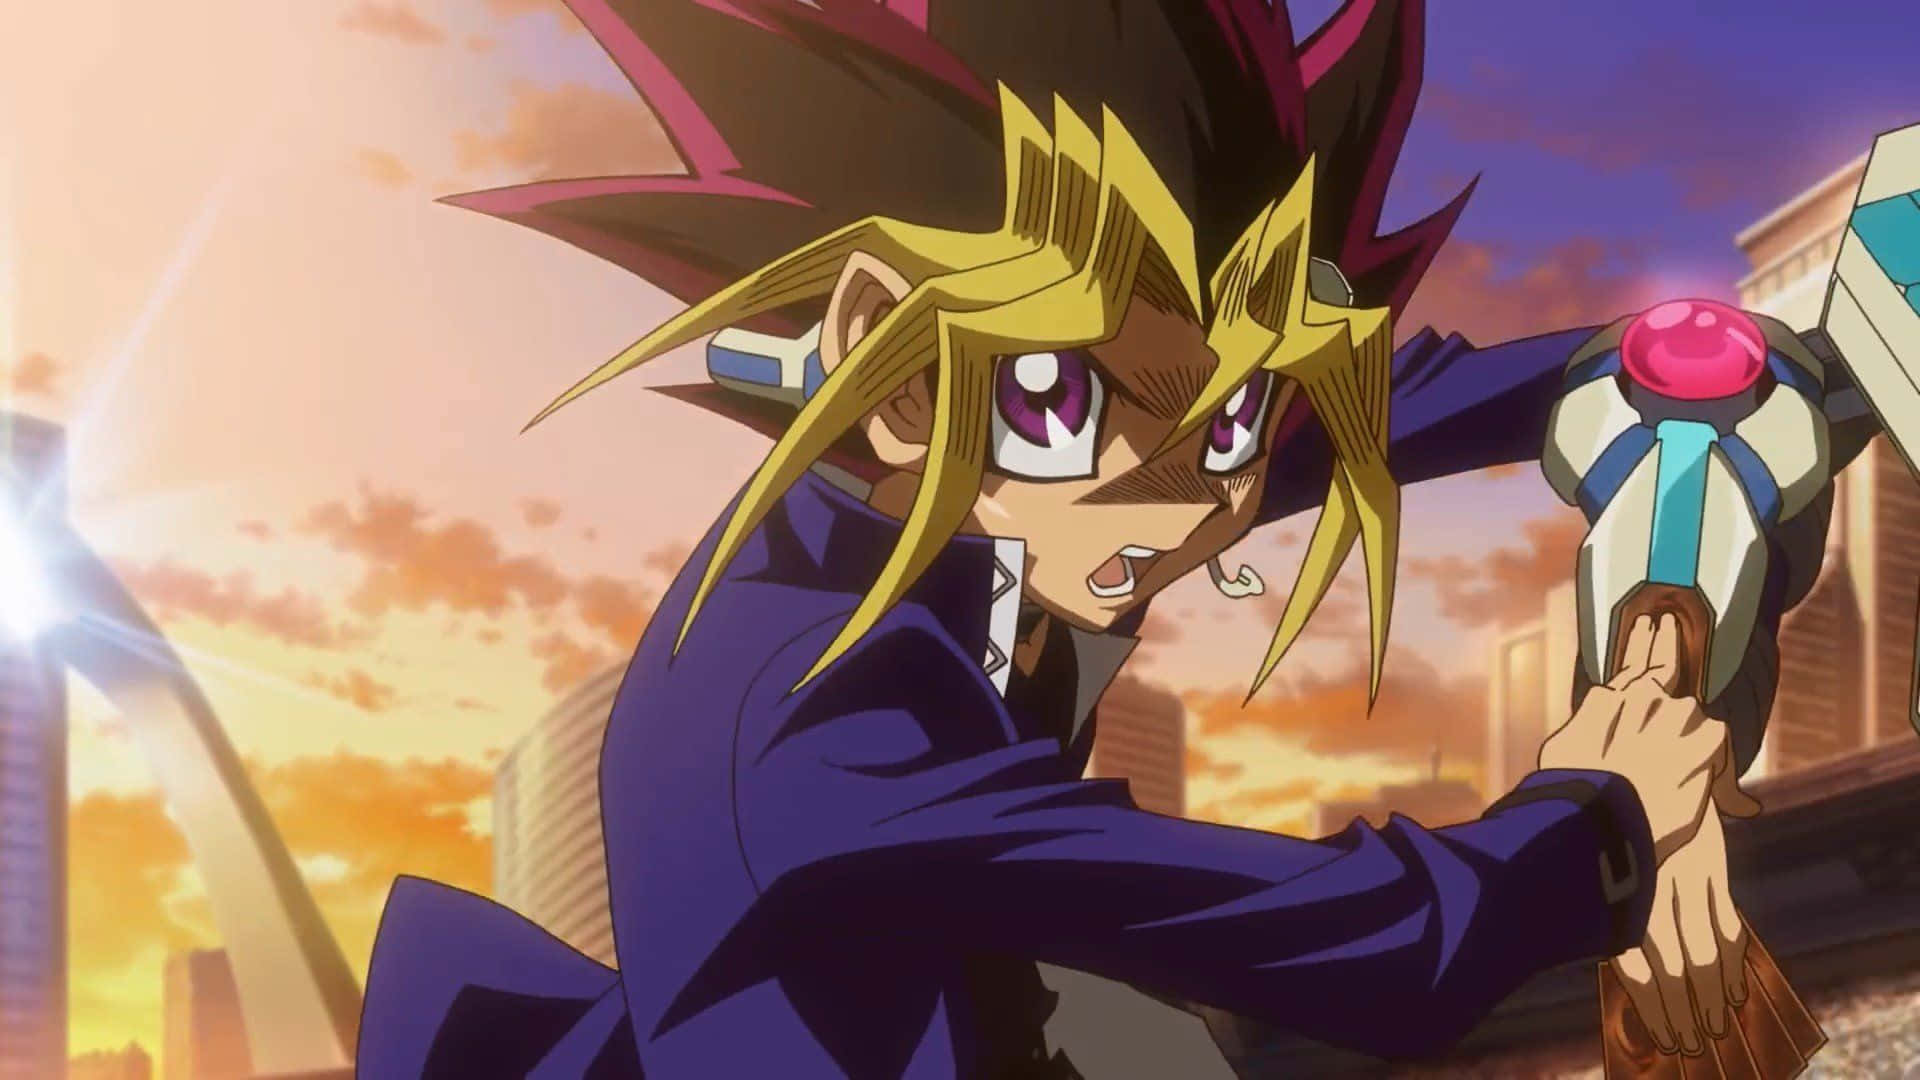 Yugi Muto strikes a pose with his iconic cards in hand Wallpaper